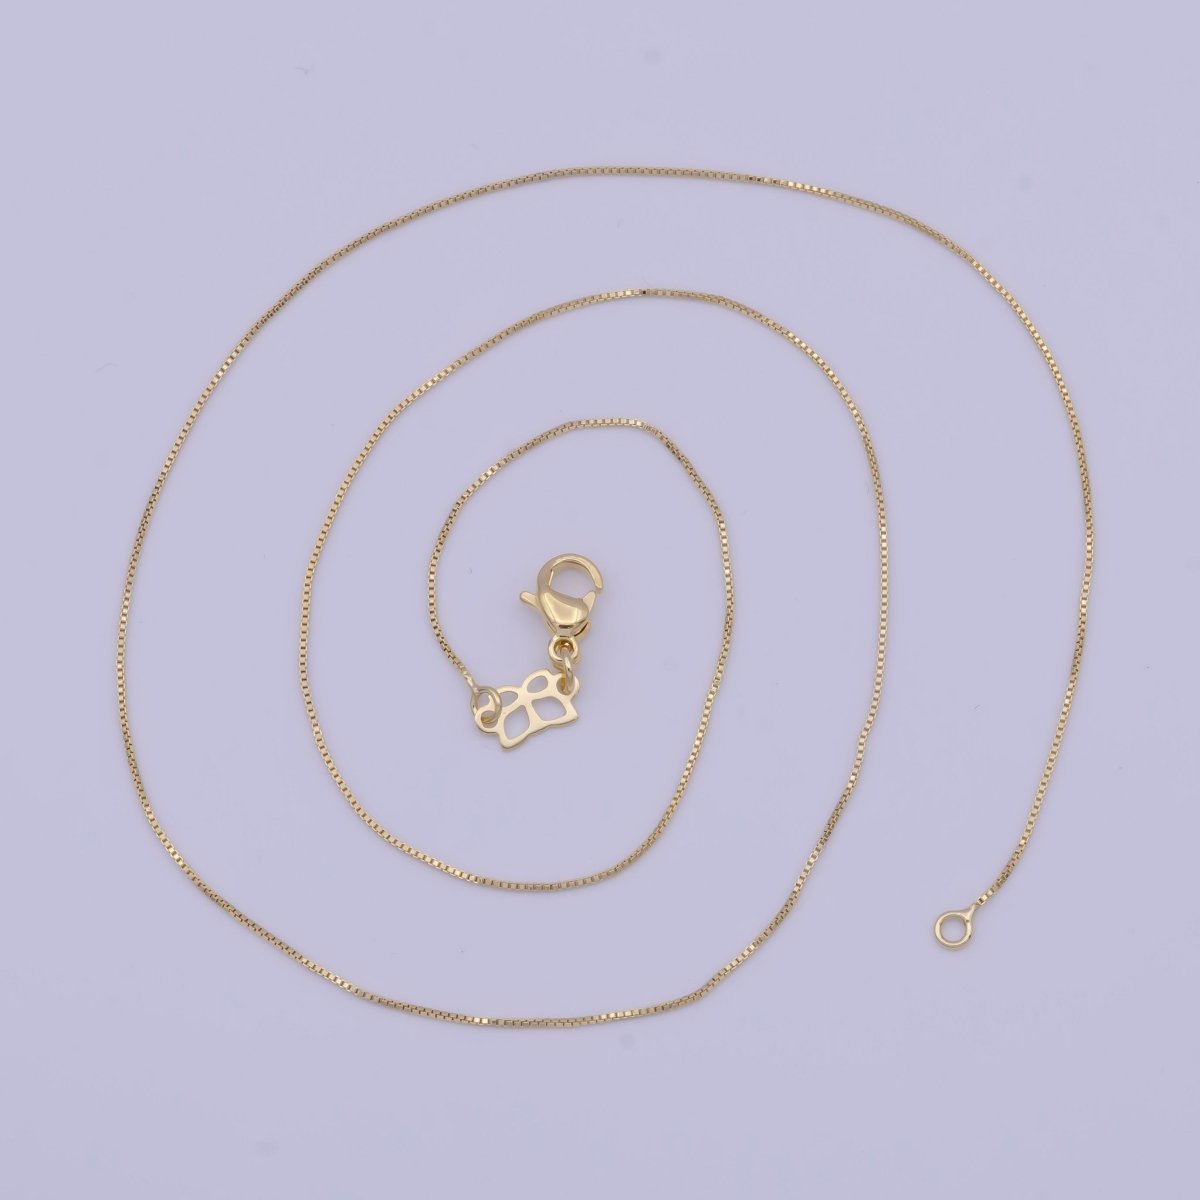 14K Gold Filled Box Chain Minimalist Necklace Fine Chain Necklace 18.0 inch Length, 0.6mm Width Ready to Wear | WA-1113 Clearance Pricing - DLUXCA